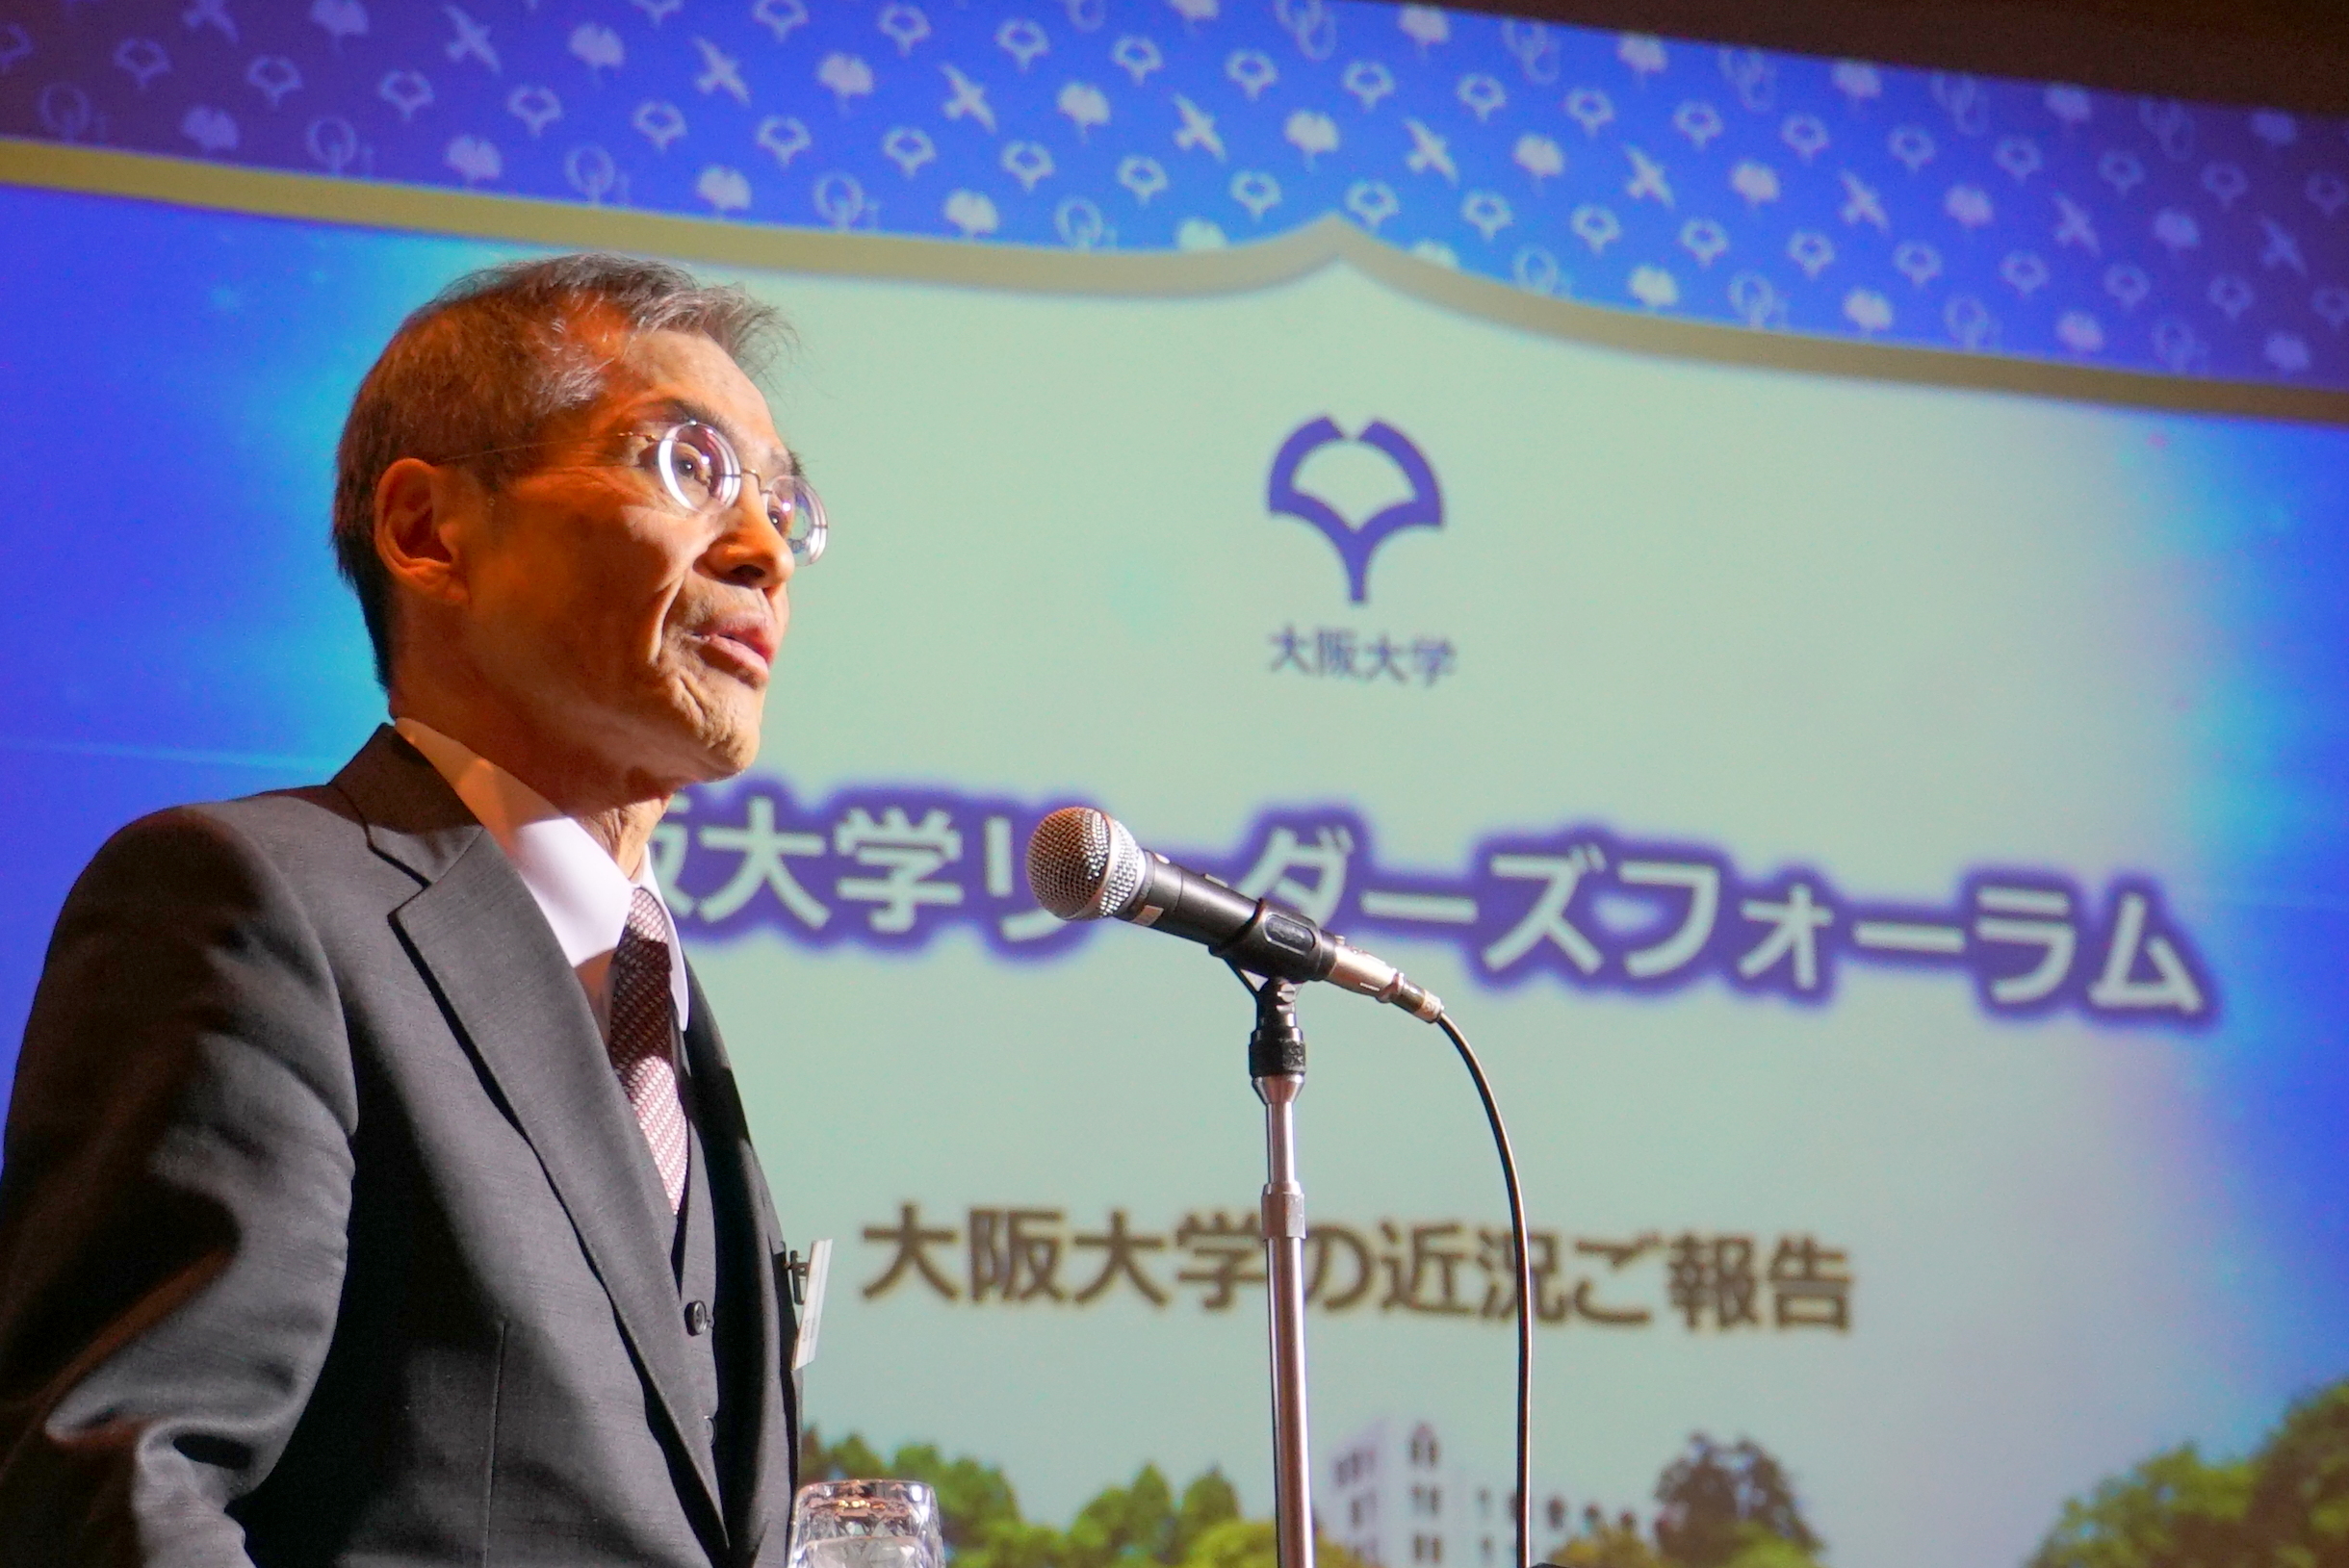 160 Individuals in Attendance at Osaka University Leaders Forum in Tokyo